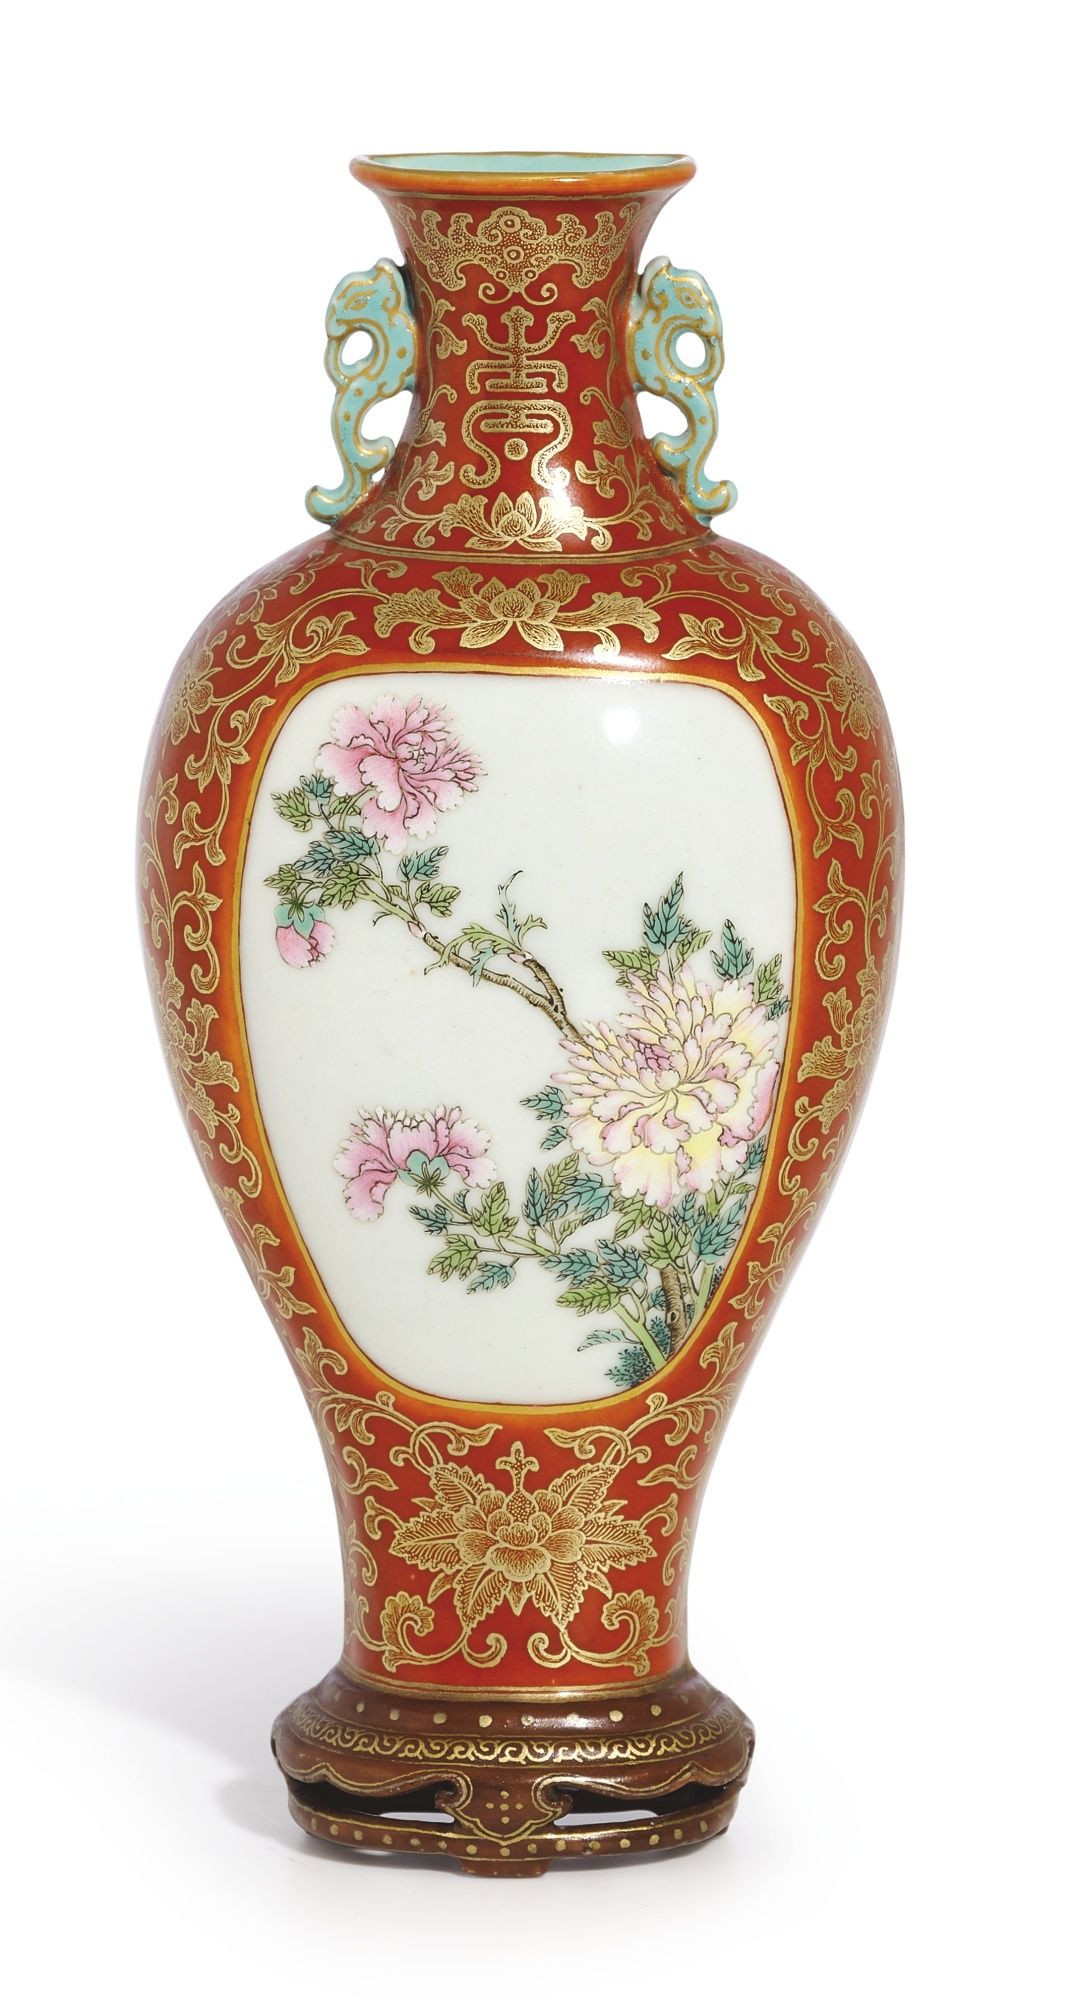 13 Cute Qianlong Emperor Vase 2024 free download qianlong emperor vase of exceptionally large and rare carved celadon glazed dragon pertaining to a coral ground gilt decorated famille rose wall vase seal mark and